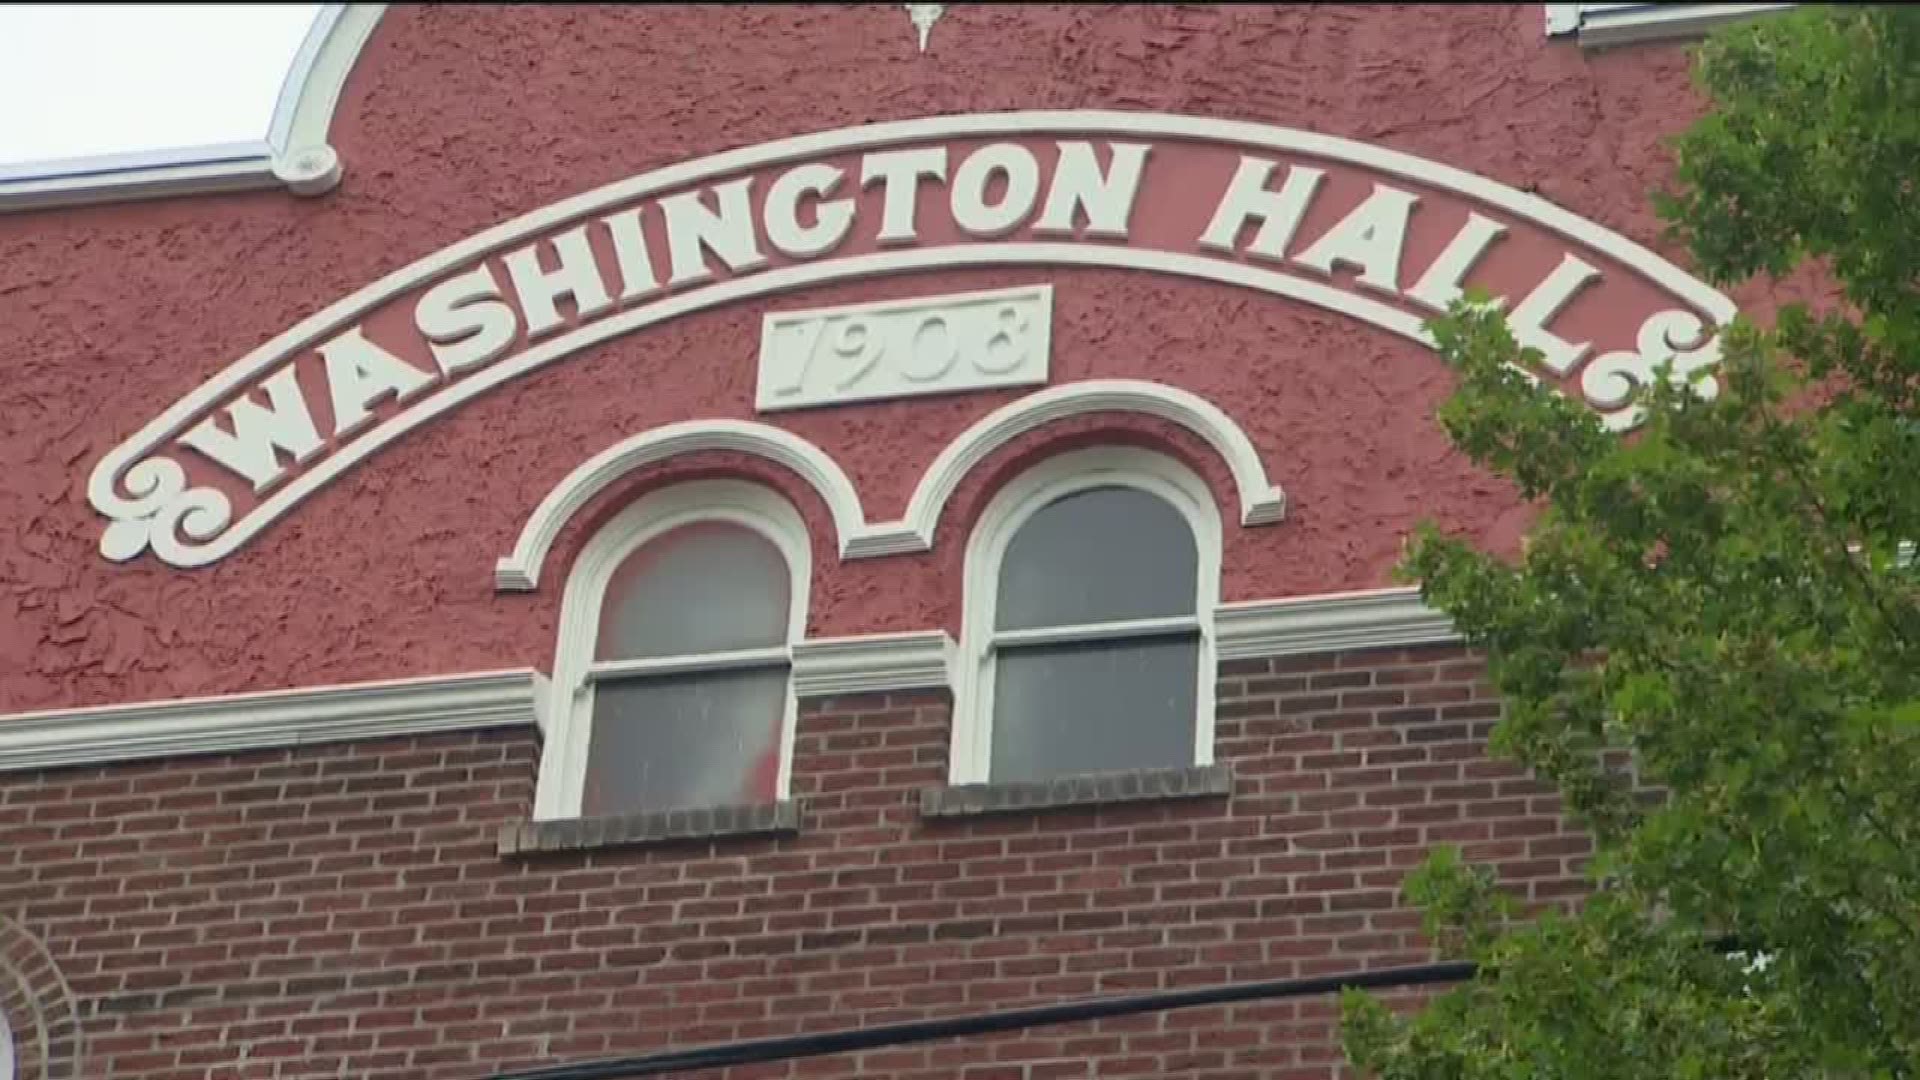 Washington Hall in Seattle's Central District was in danger of closing, but now there's life in the old building.